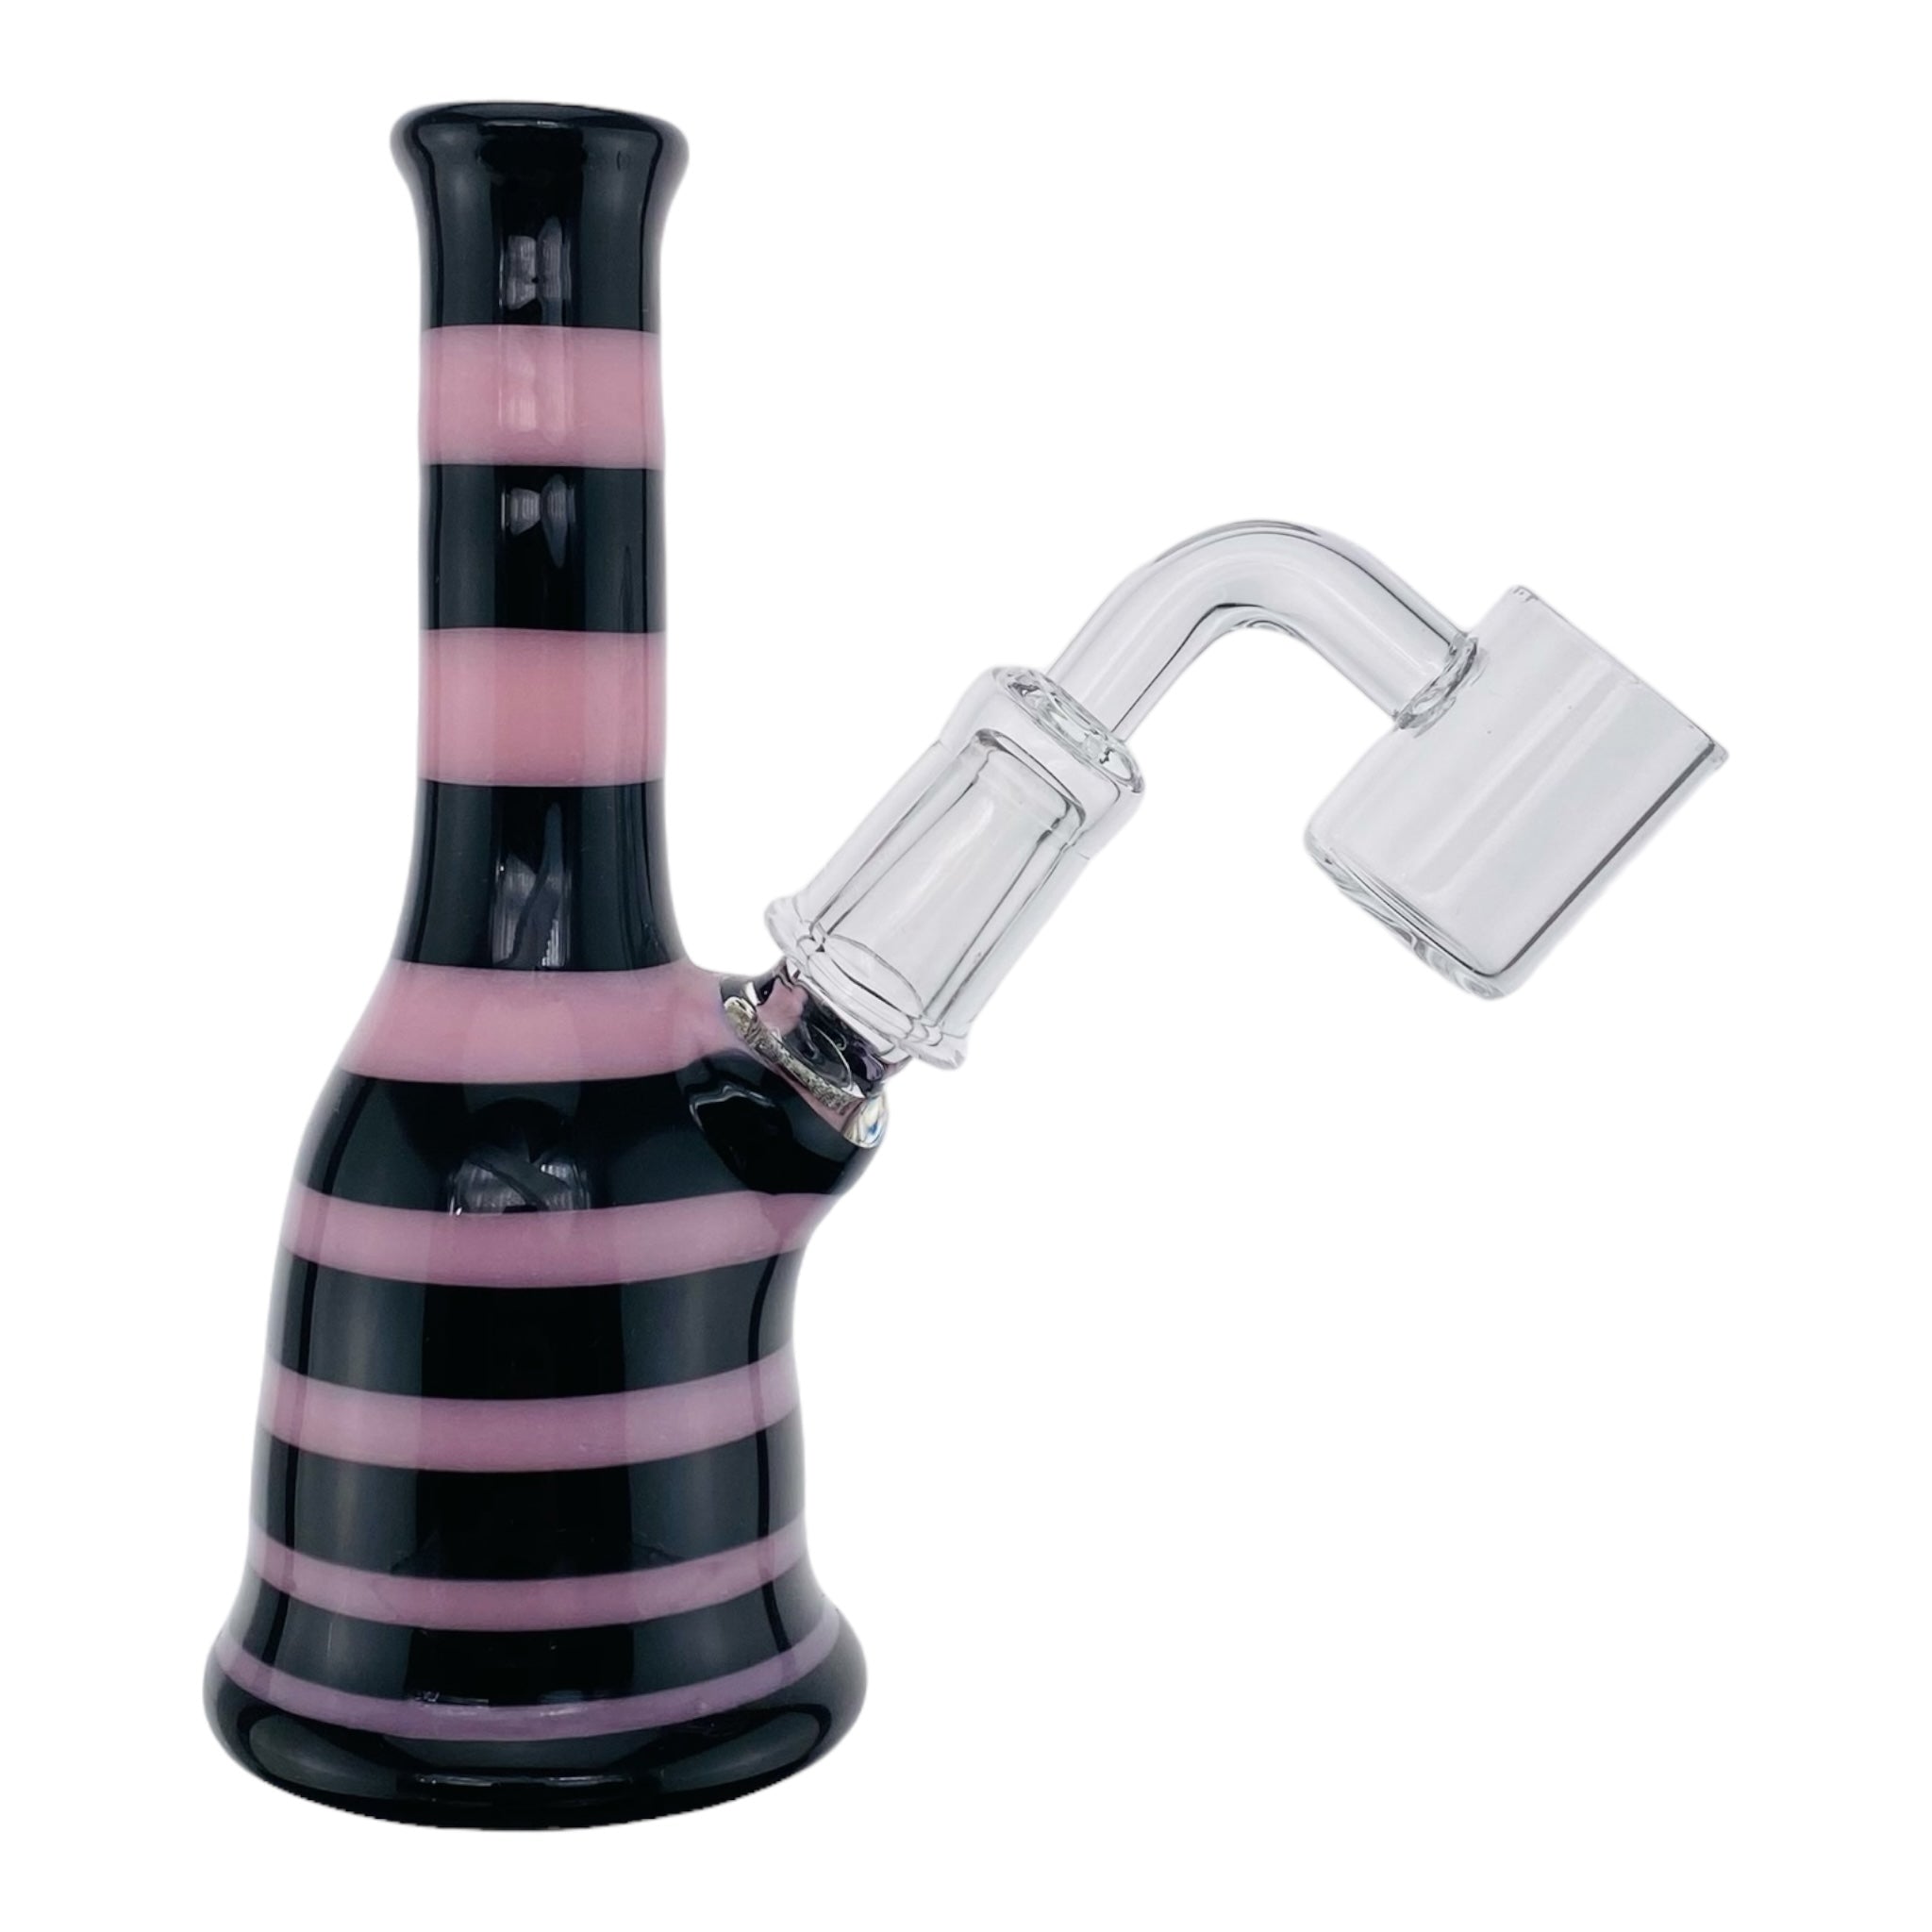 cute and girly heady glass Pink And Black Mini Custom Dab Rig for sale